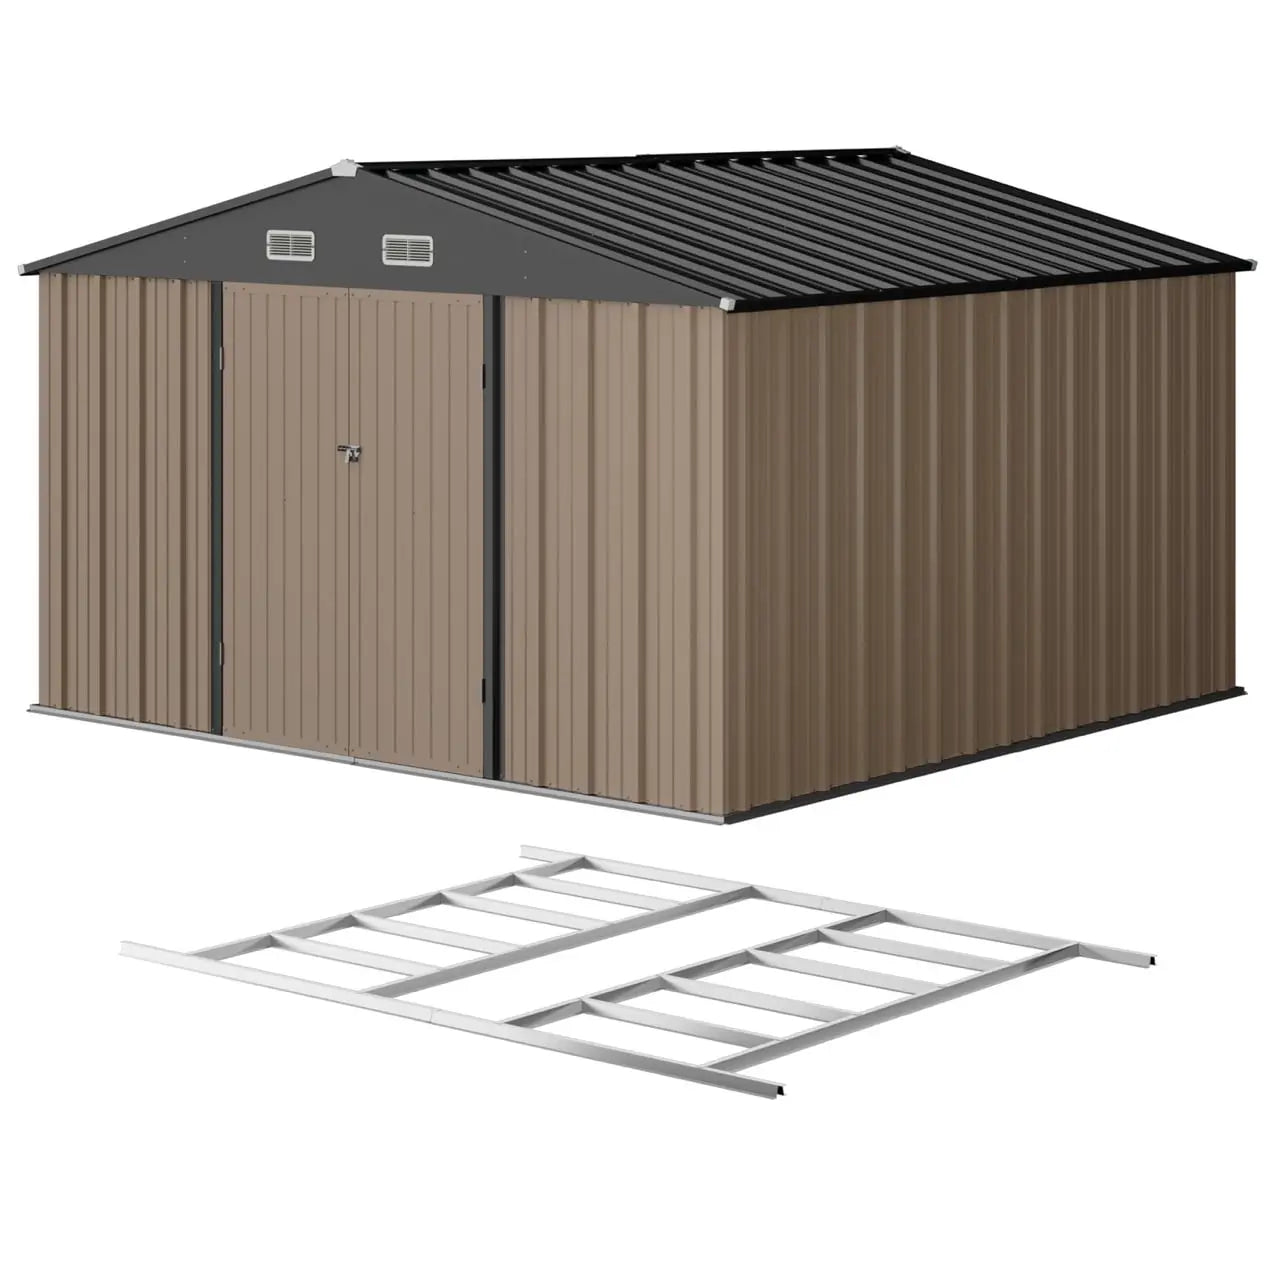 Patiowell 10x10 Metal Shed Pro